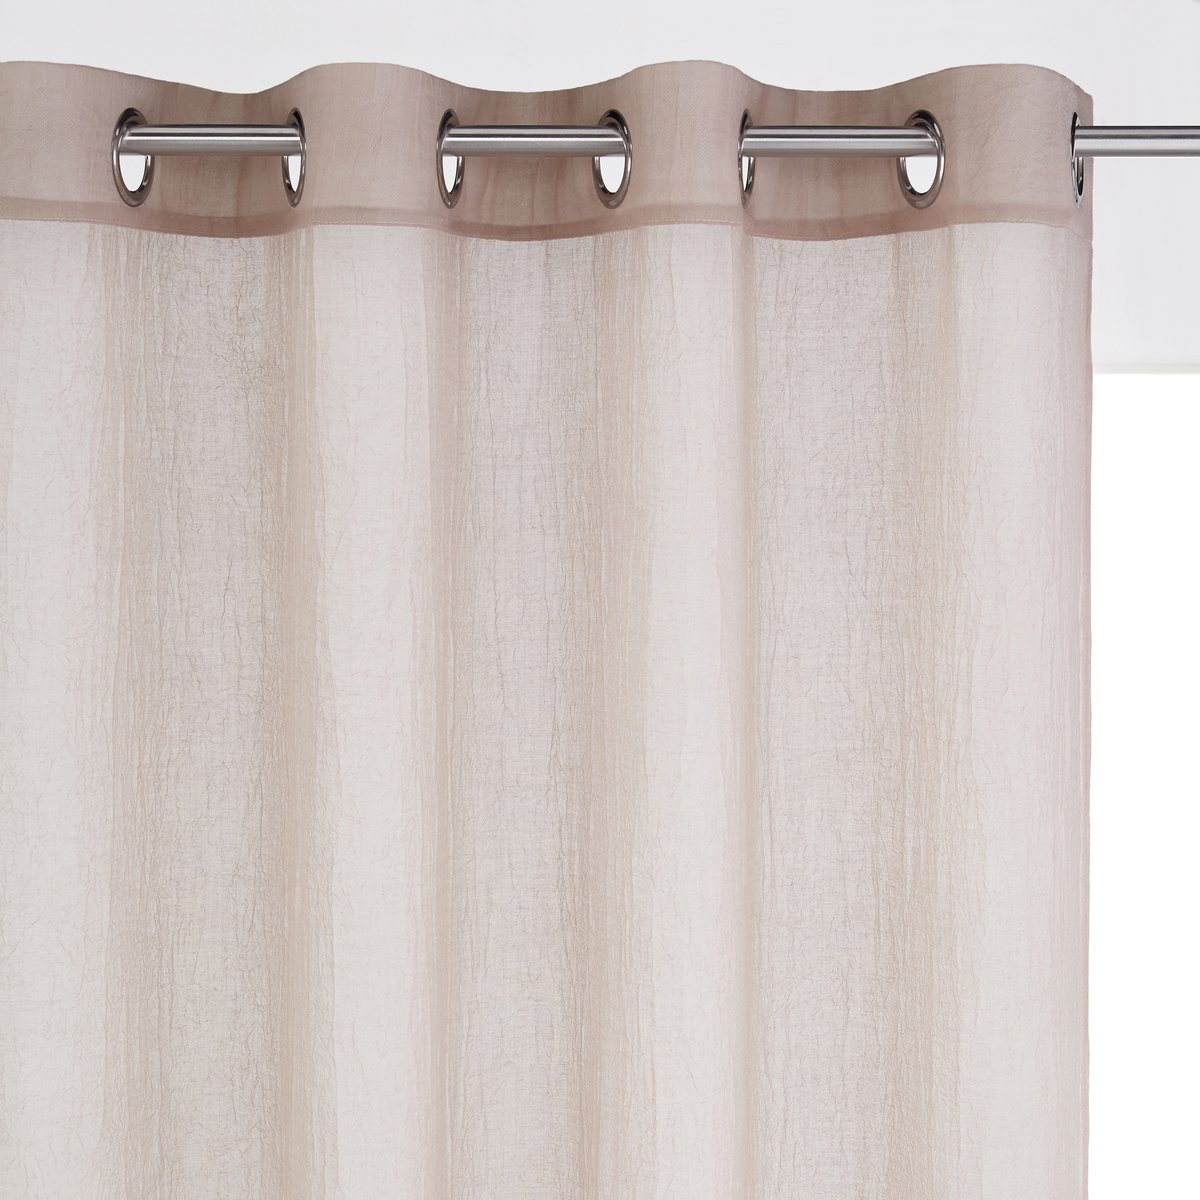 Image of Atbir Single Sheer Crinkle Voile Panel with Eyelets